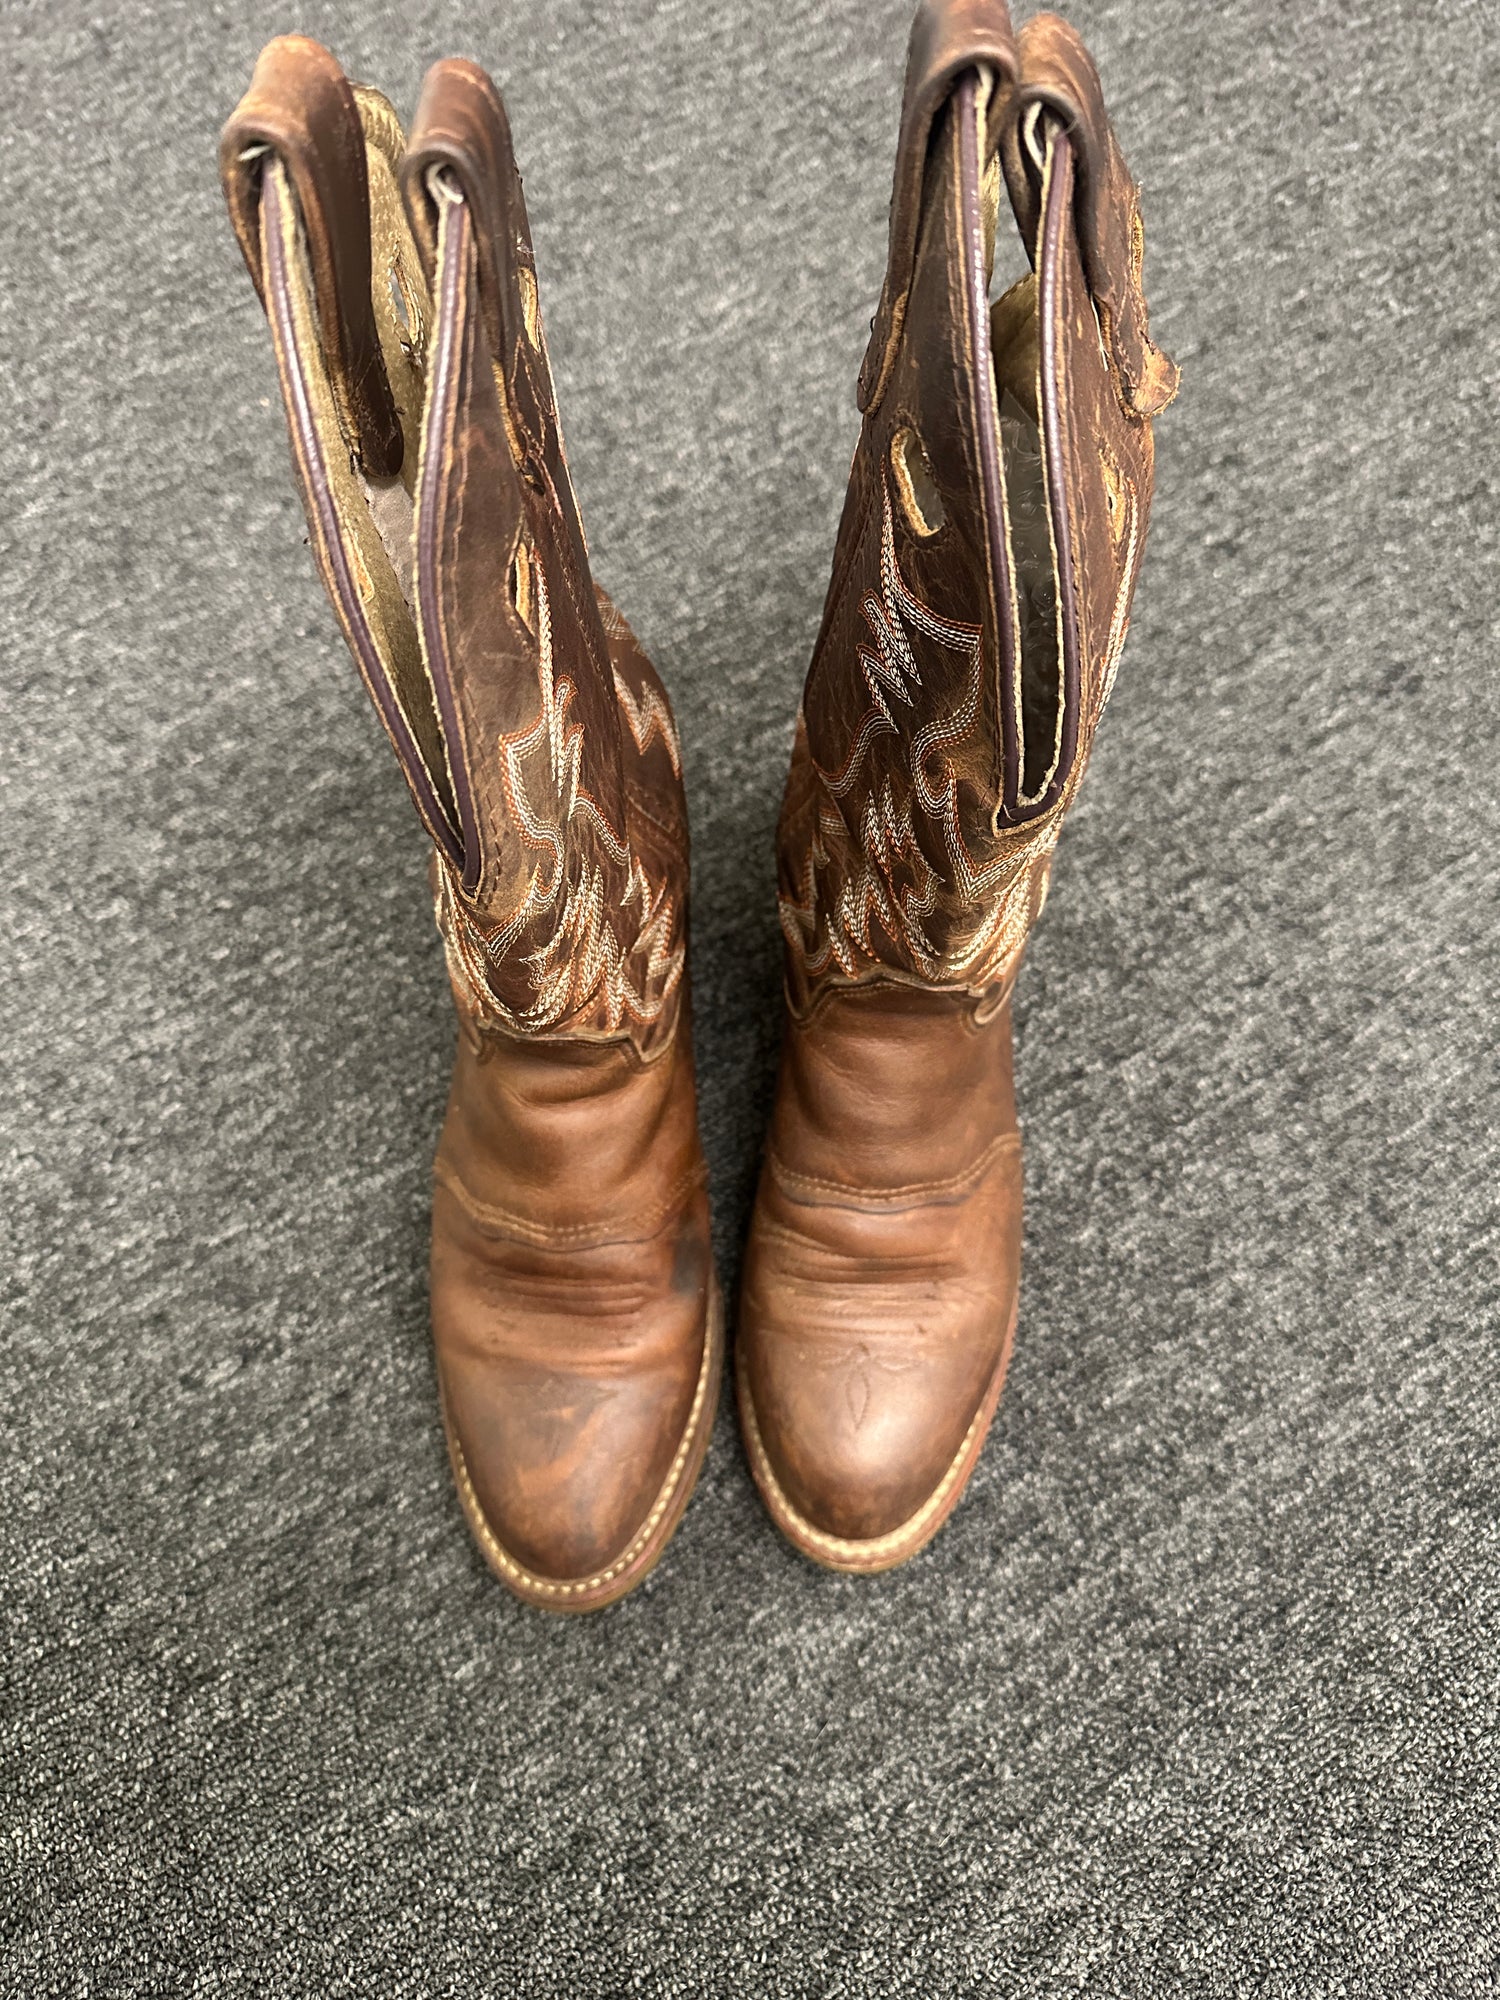 Women's Western Boots - Double - H - Size 8 Med.